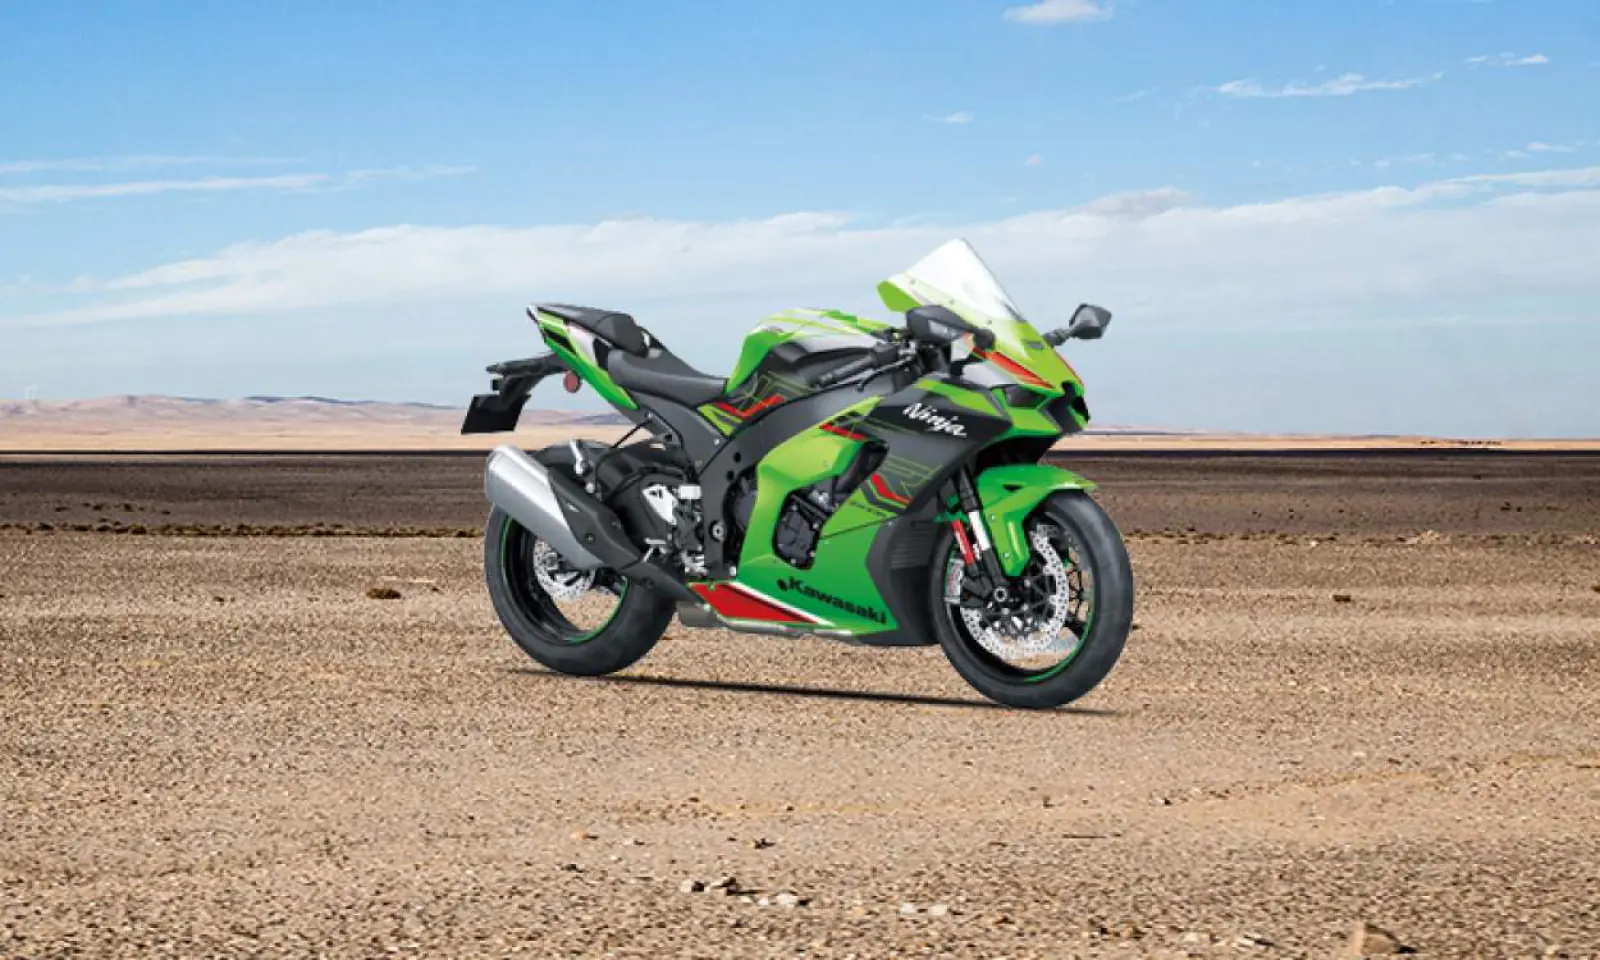 Kawasaki's gift to enthusiasts of sports bikes, with fantastic deals on these; Know details